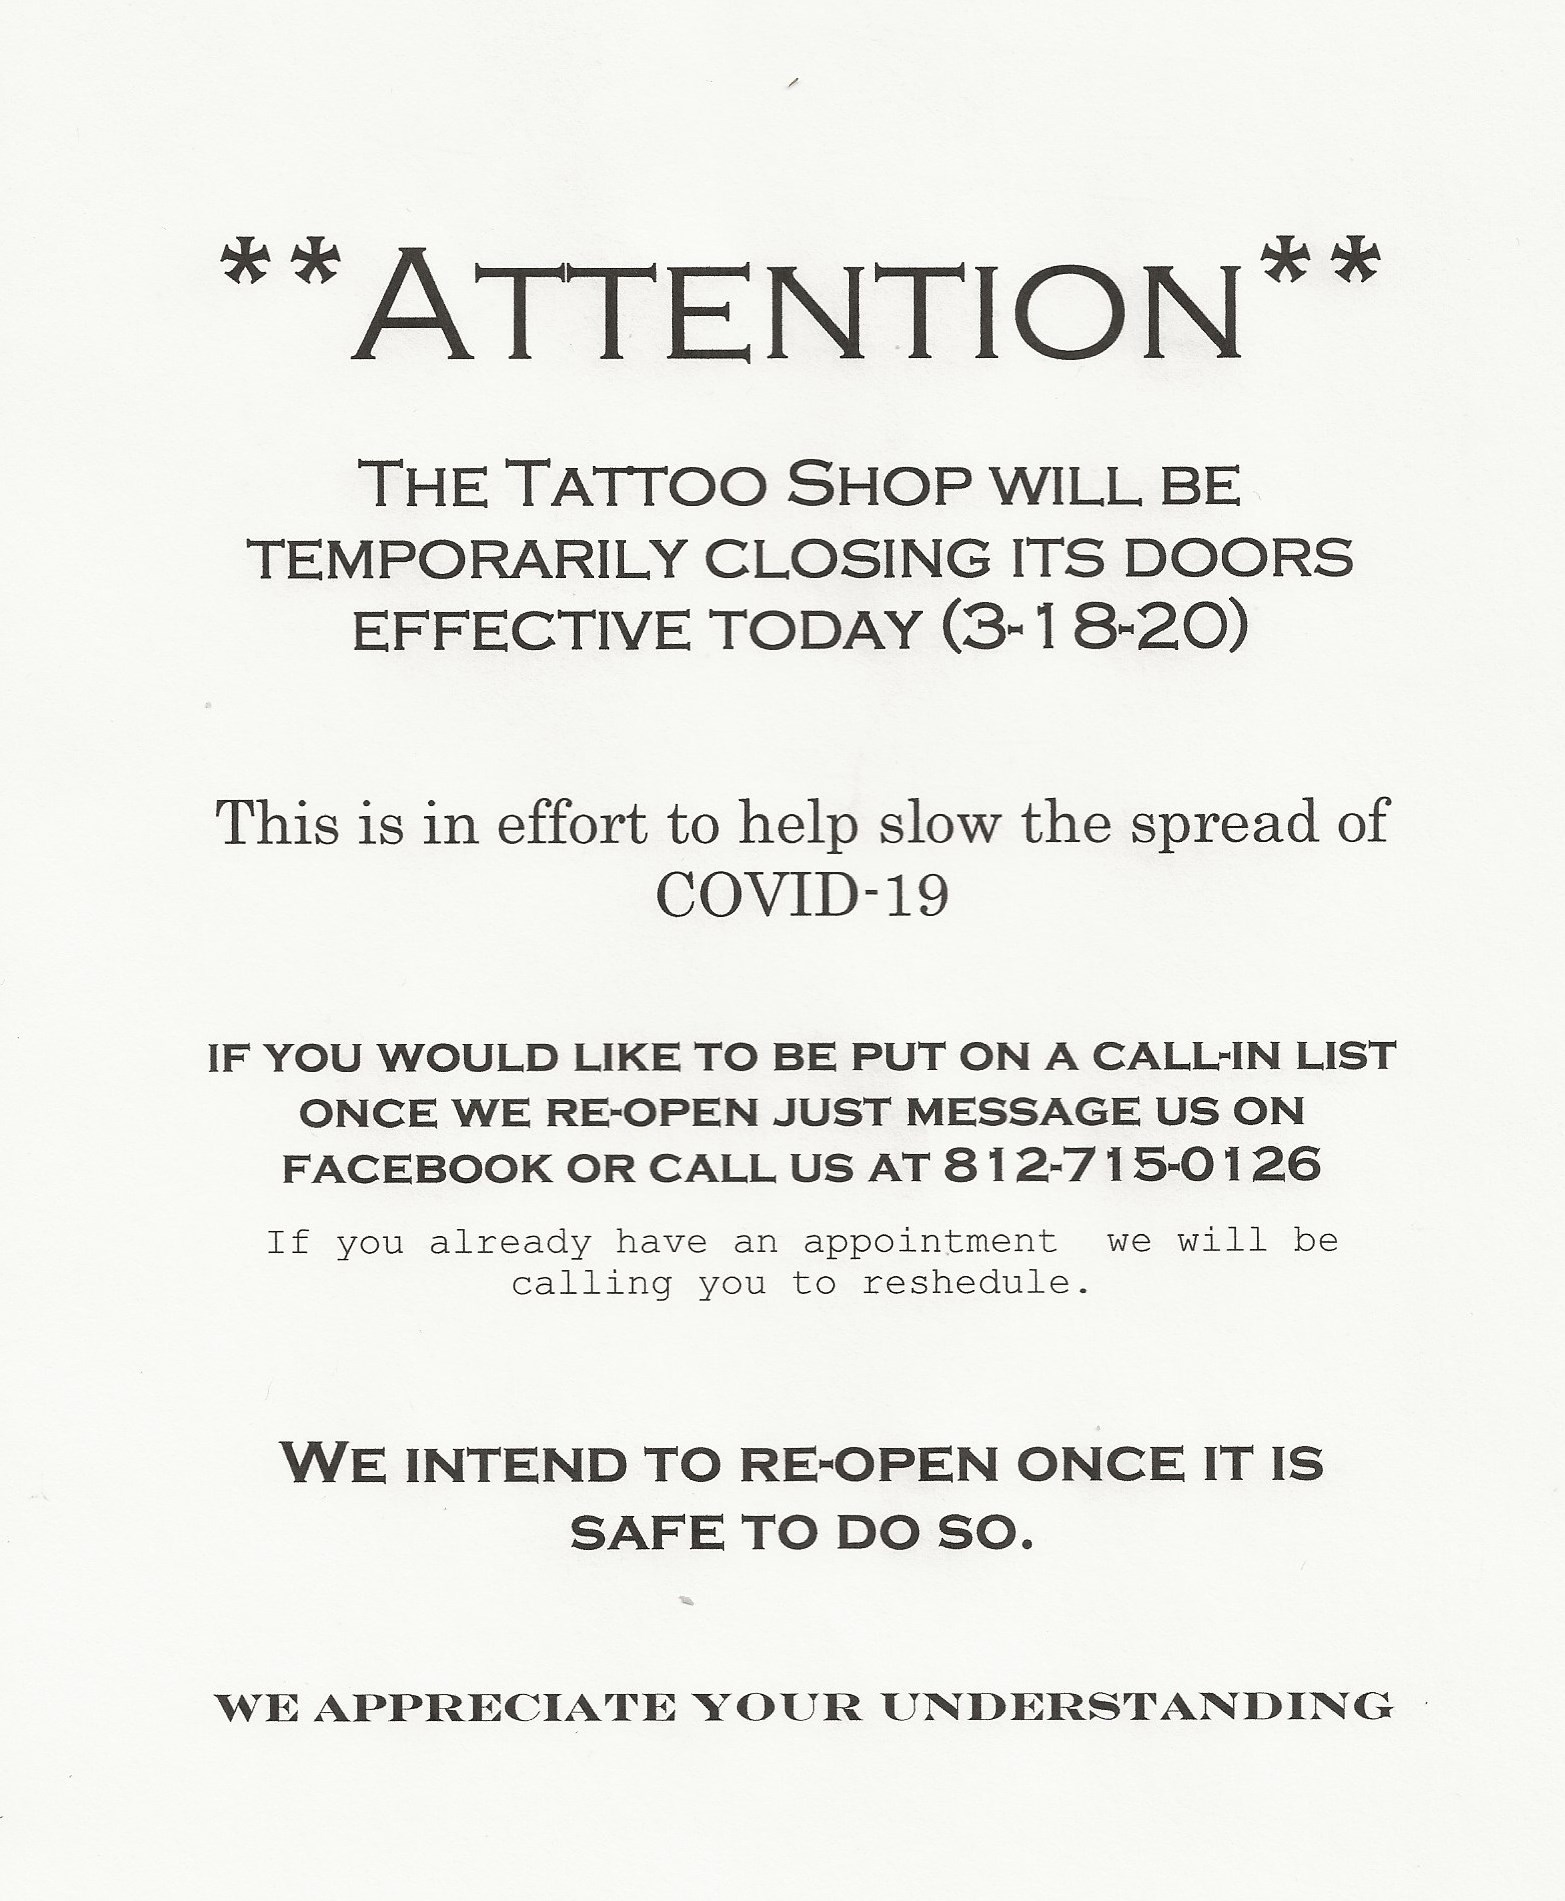 The Tattoo Shop 126 W Locust St, Boonville Indiana 47601